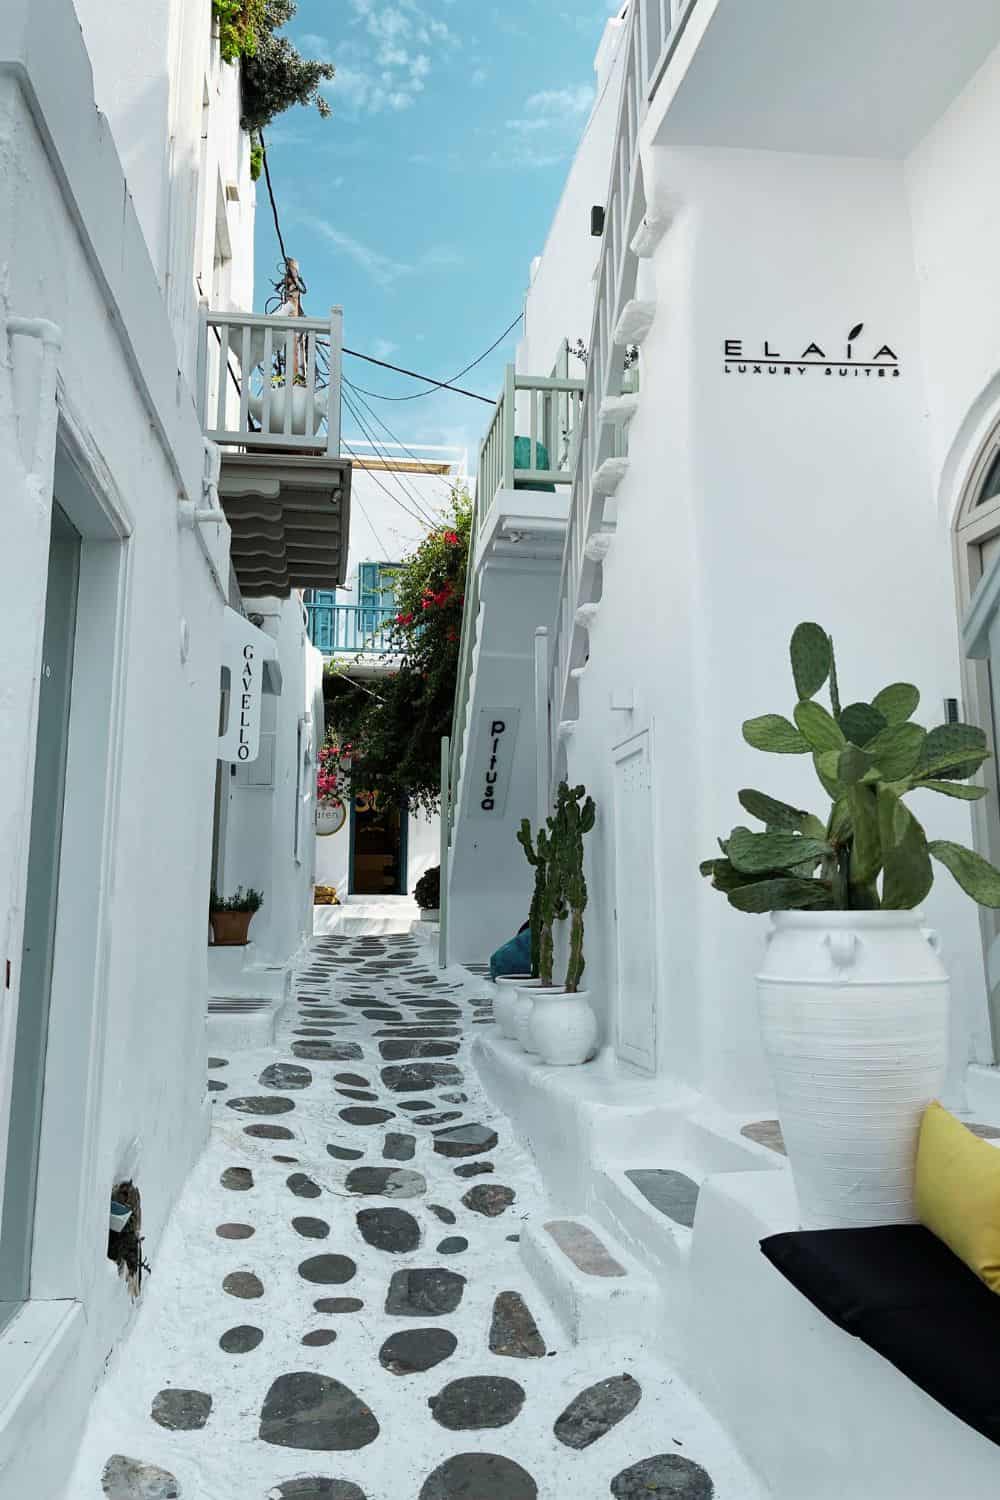 A picturesque narrow alley in Mykonos, framed by white Cycladic buildings with blue doors and windows. The path is adorned with smooth pebbles set in white plaster, creating a beautiful pattern that leads to a sign for 'ELAIA LUXURY SUITES,' indicating a boutique accommodation